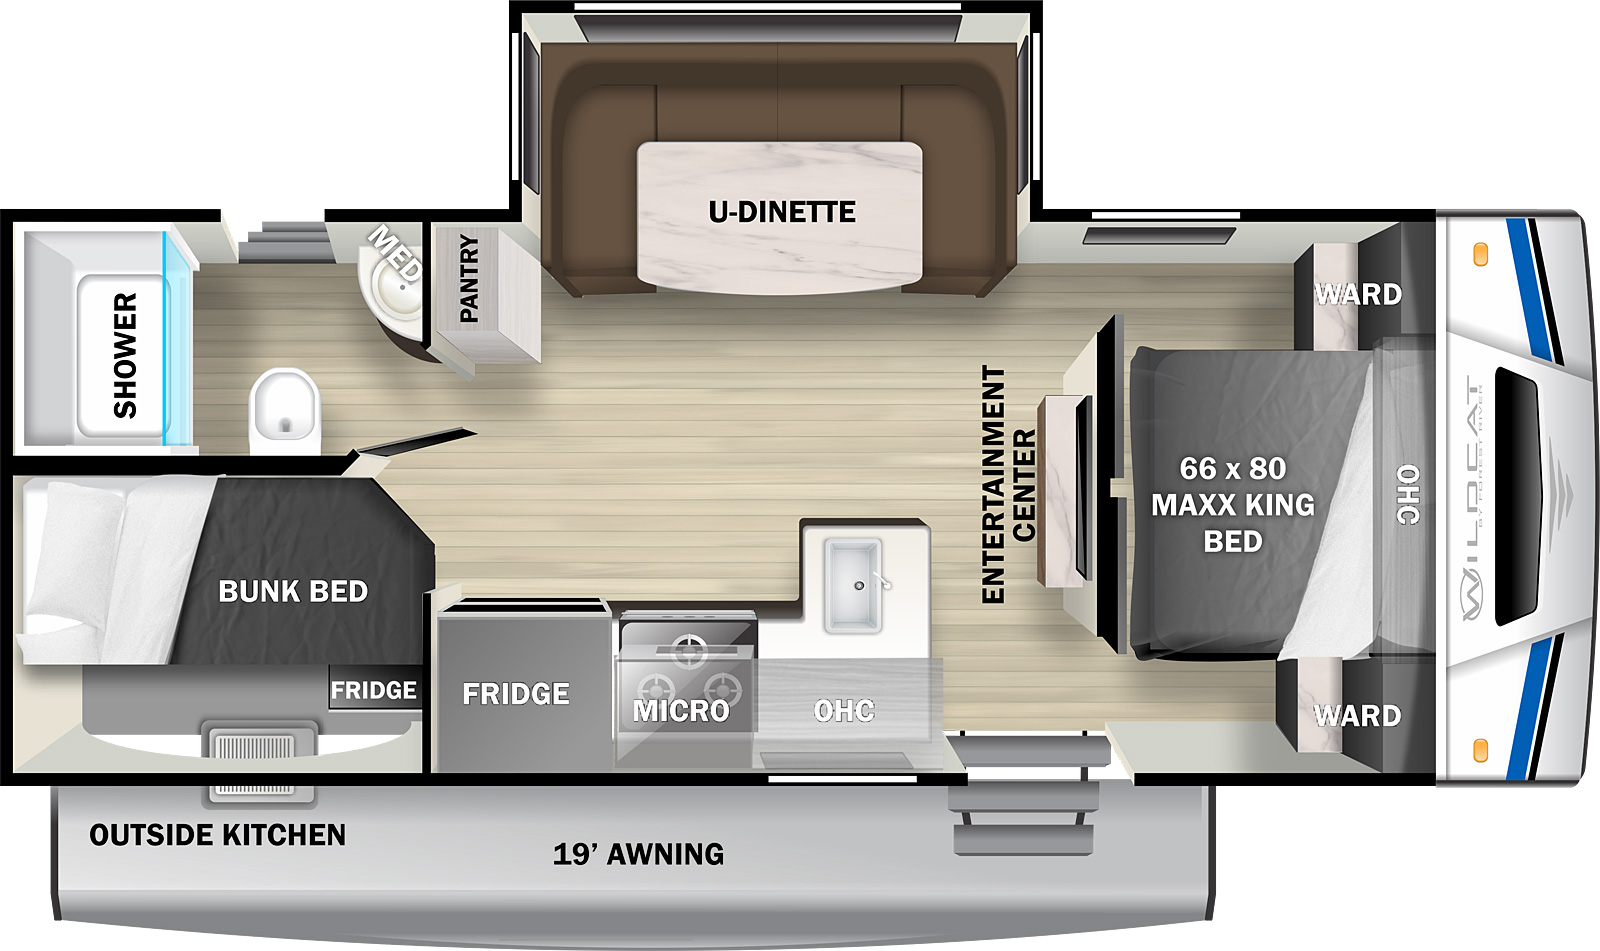 Wildcat Travel Trailers 243DBX floorplan. The 243DBX has one slide out and two plus entry doors.